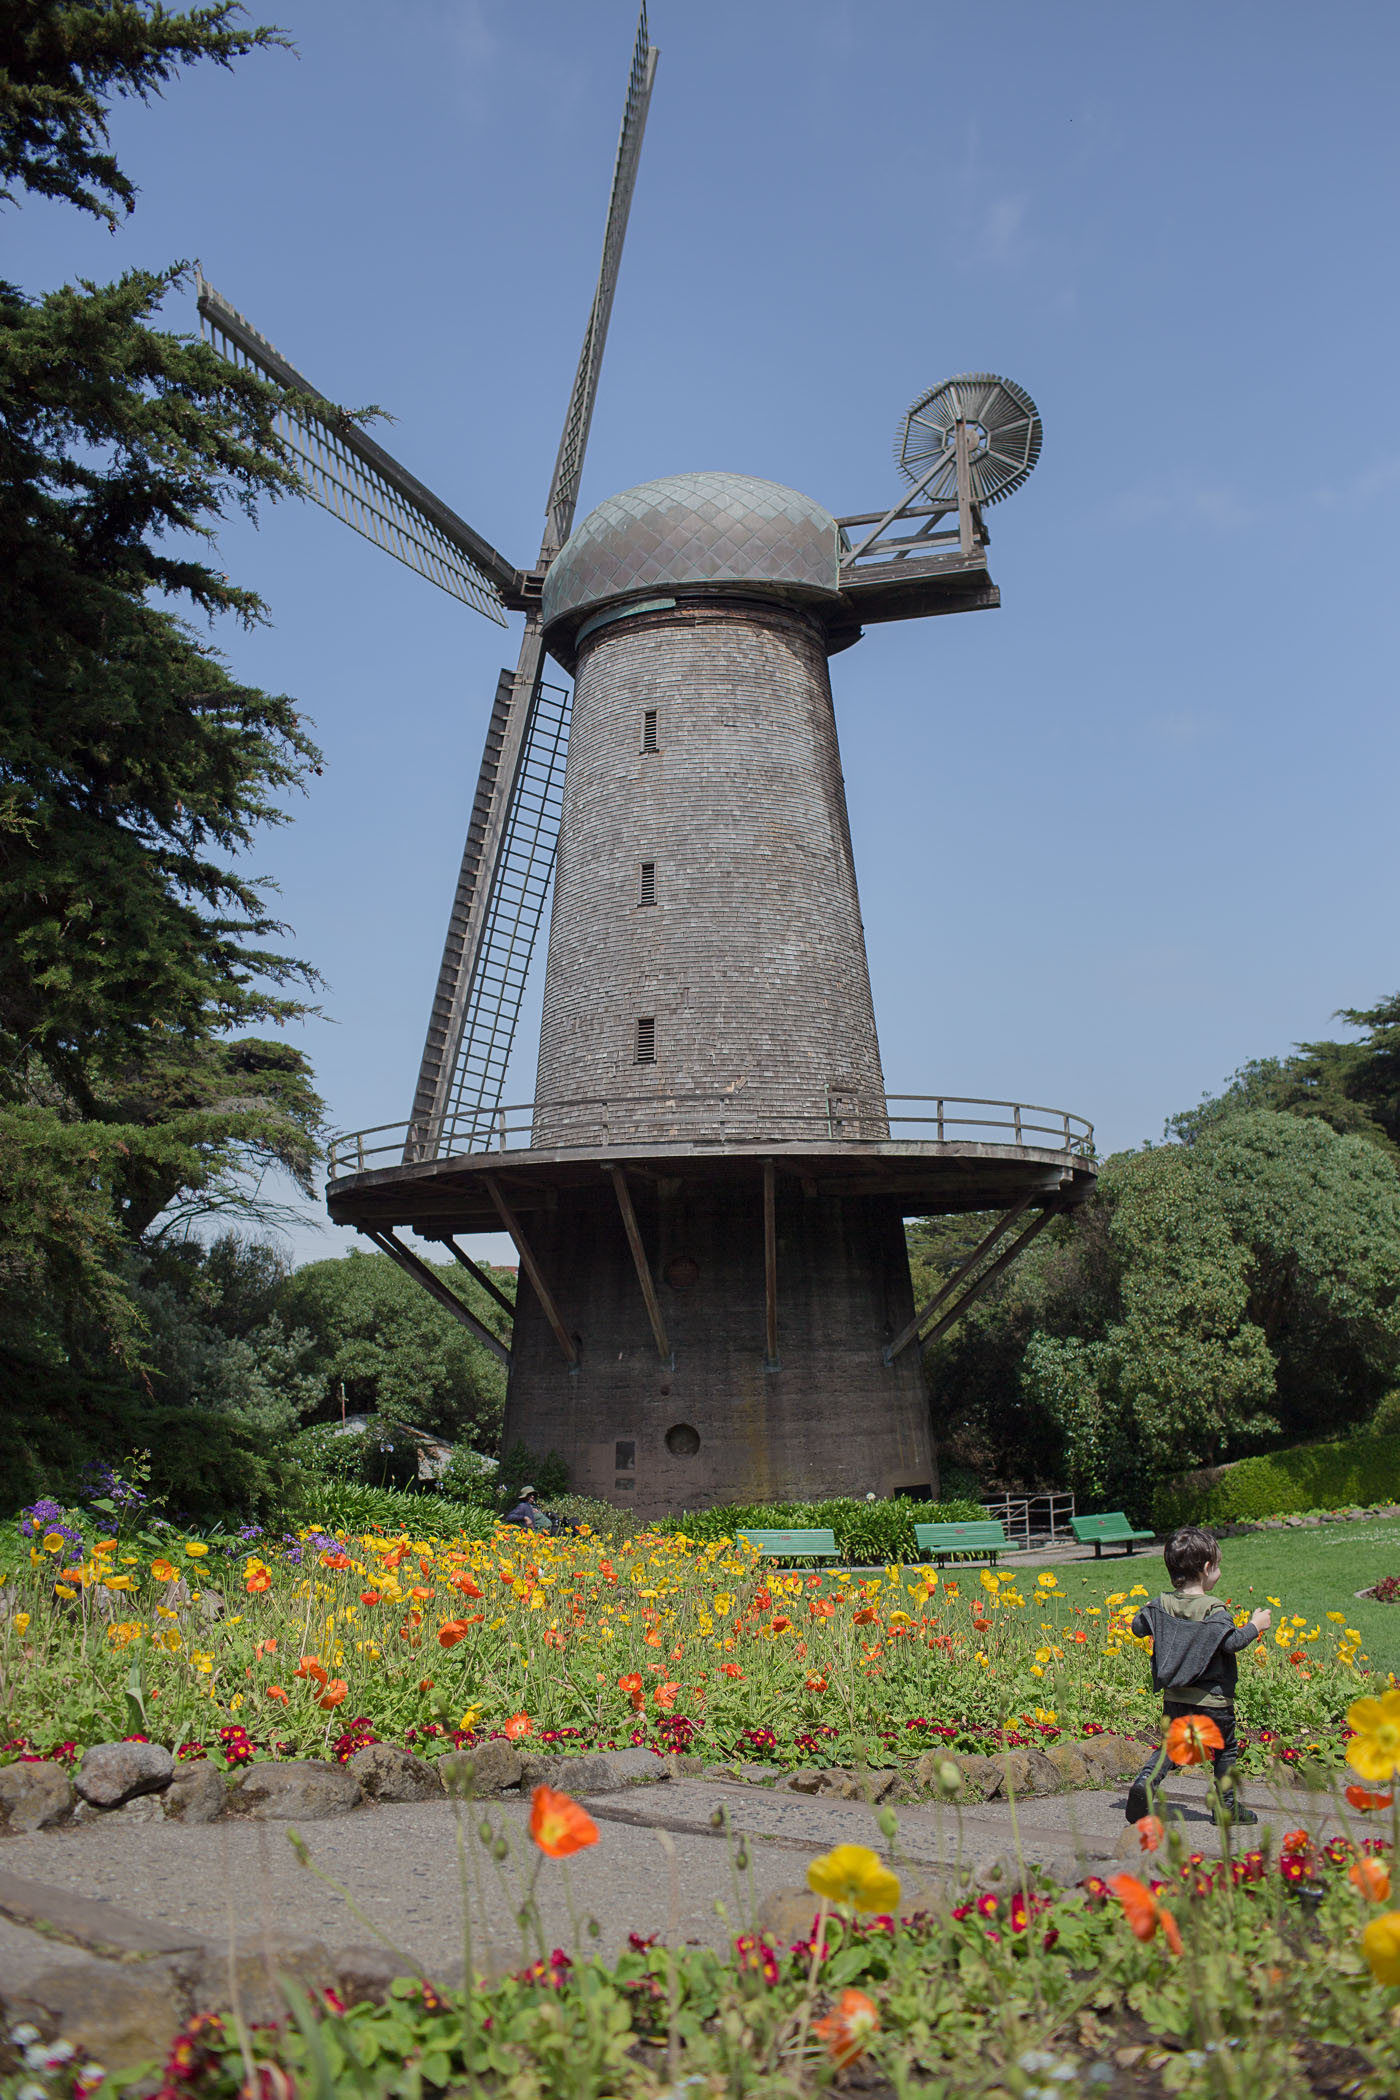 Dutch Windmill in San Francisco's Golden Gate Park, part of our 2015 year in review at www.hejdoll.com